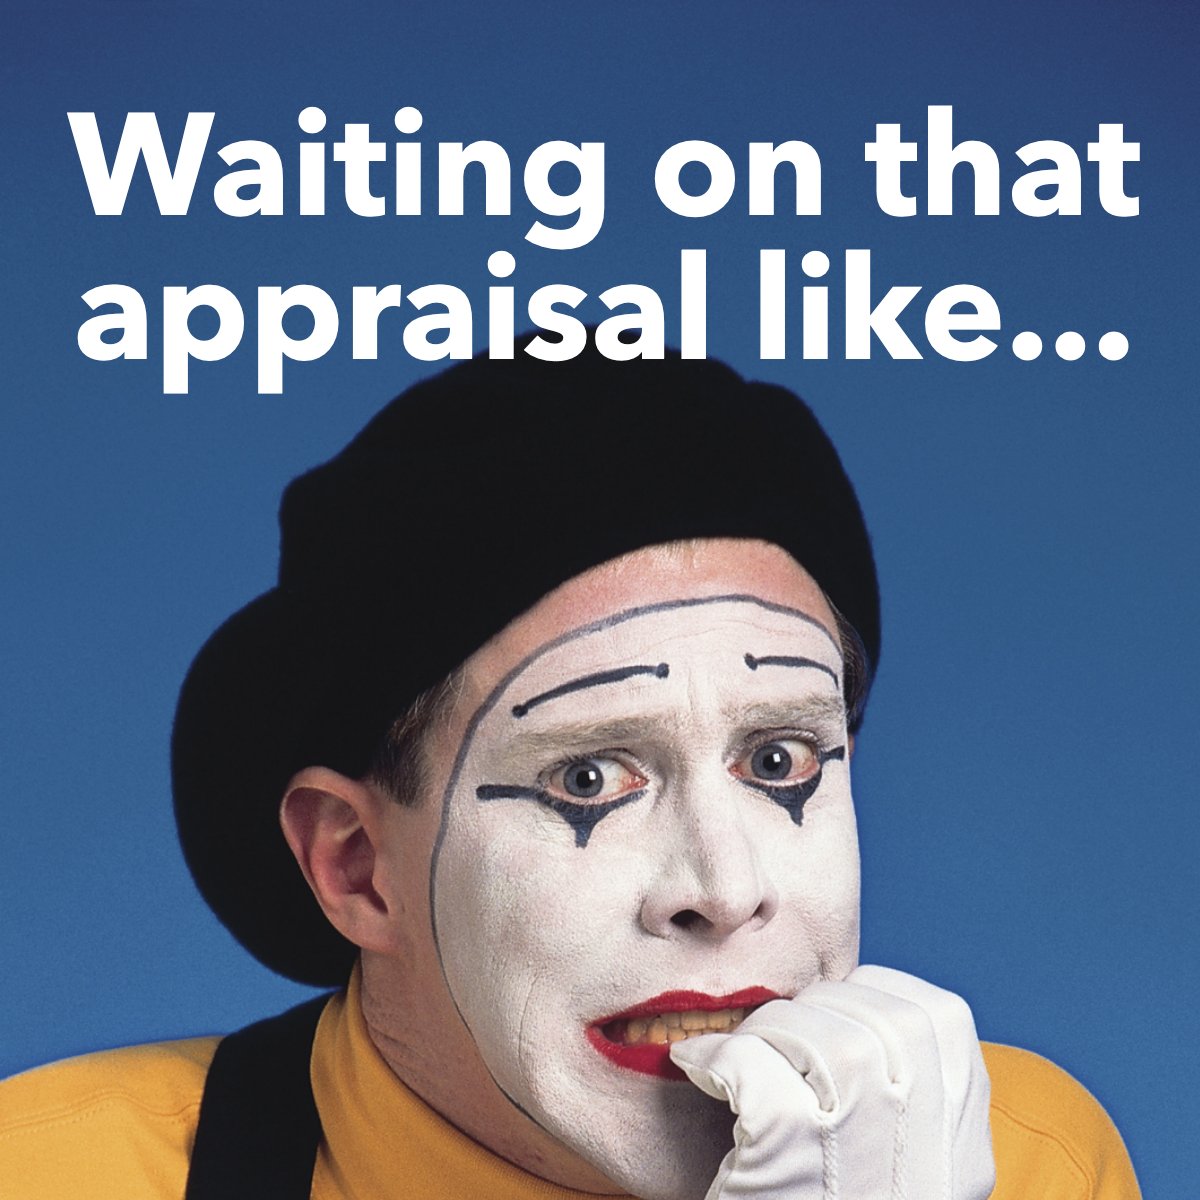 This is literally all of us! 🥴

#storyofourlife #appraisal #realestate101 #realestatehumor #realestate
 #AmericasMortgageSolutions #christianpenner #onestopbrokershop #mortgagebrokerwestpalmbeach #epicrealeststedeals #TheChristianPennerMortgageTeam